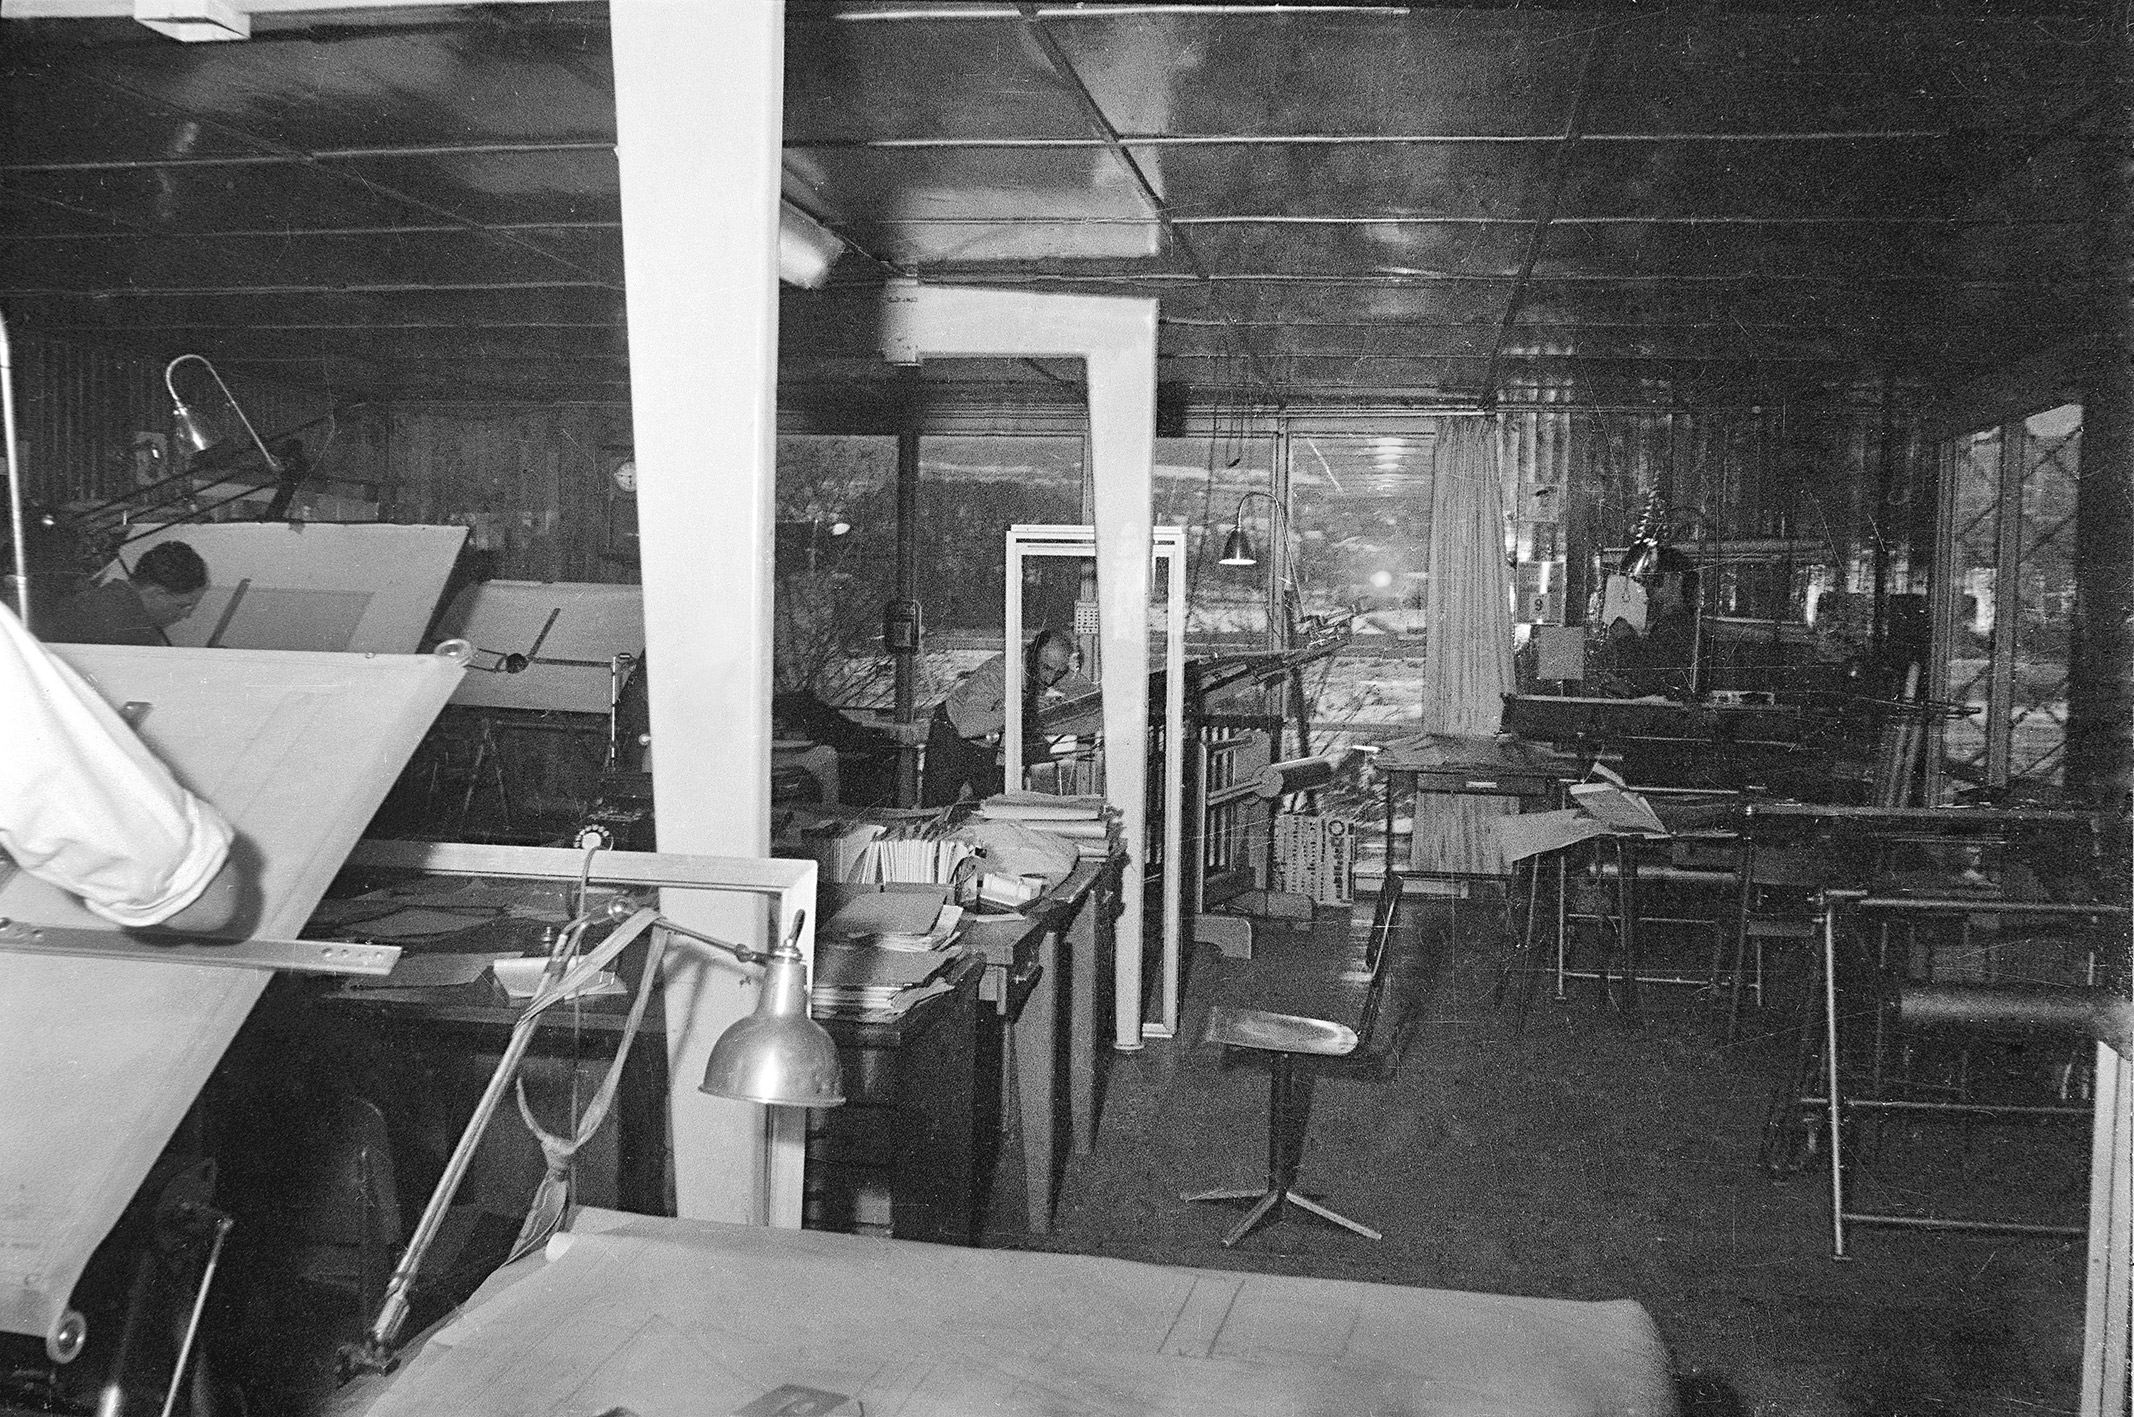 Ateliers Jean Prouvé design office. Equipped with furniture from the Ateliers: Métropole no. 305 chair, Dactylo chair, Standard desk, Cité table. Undated view.